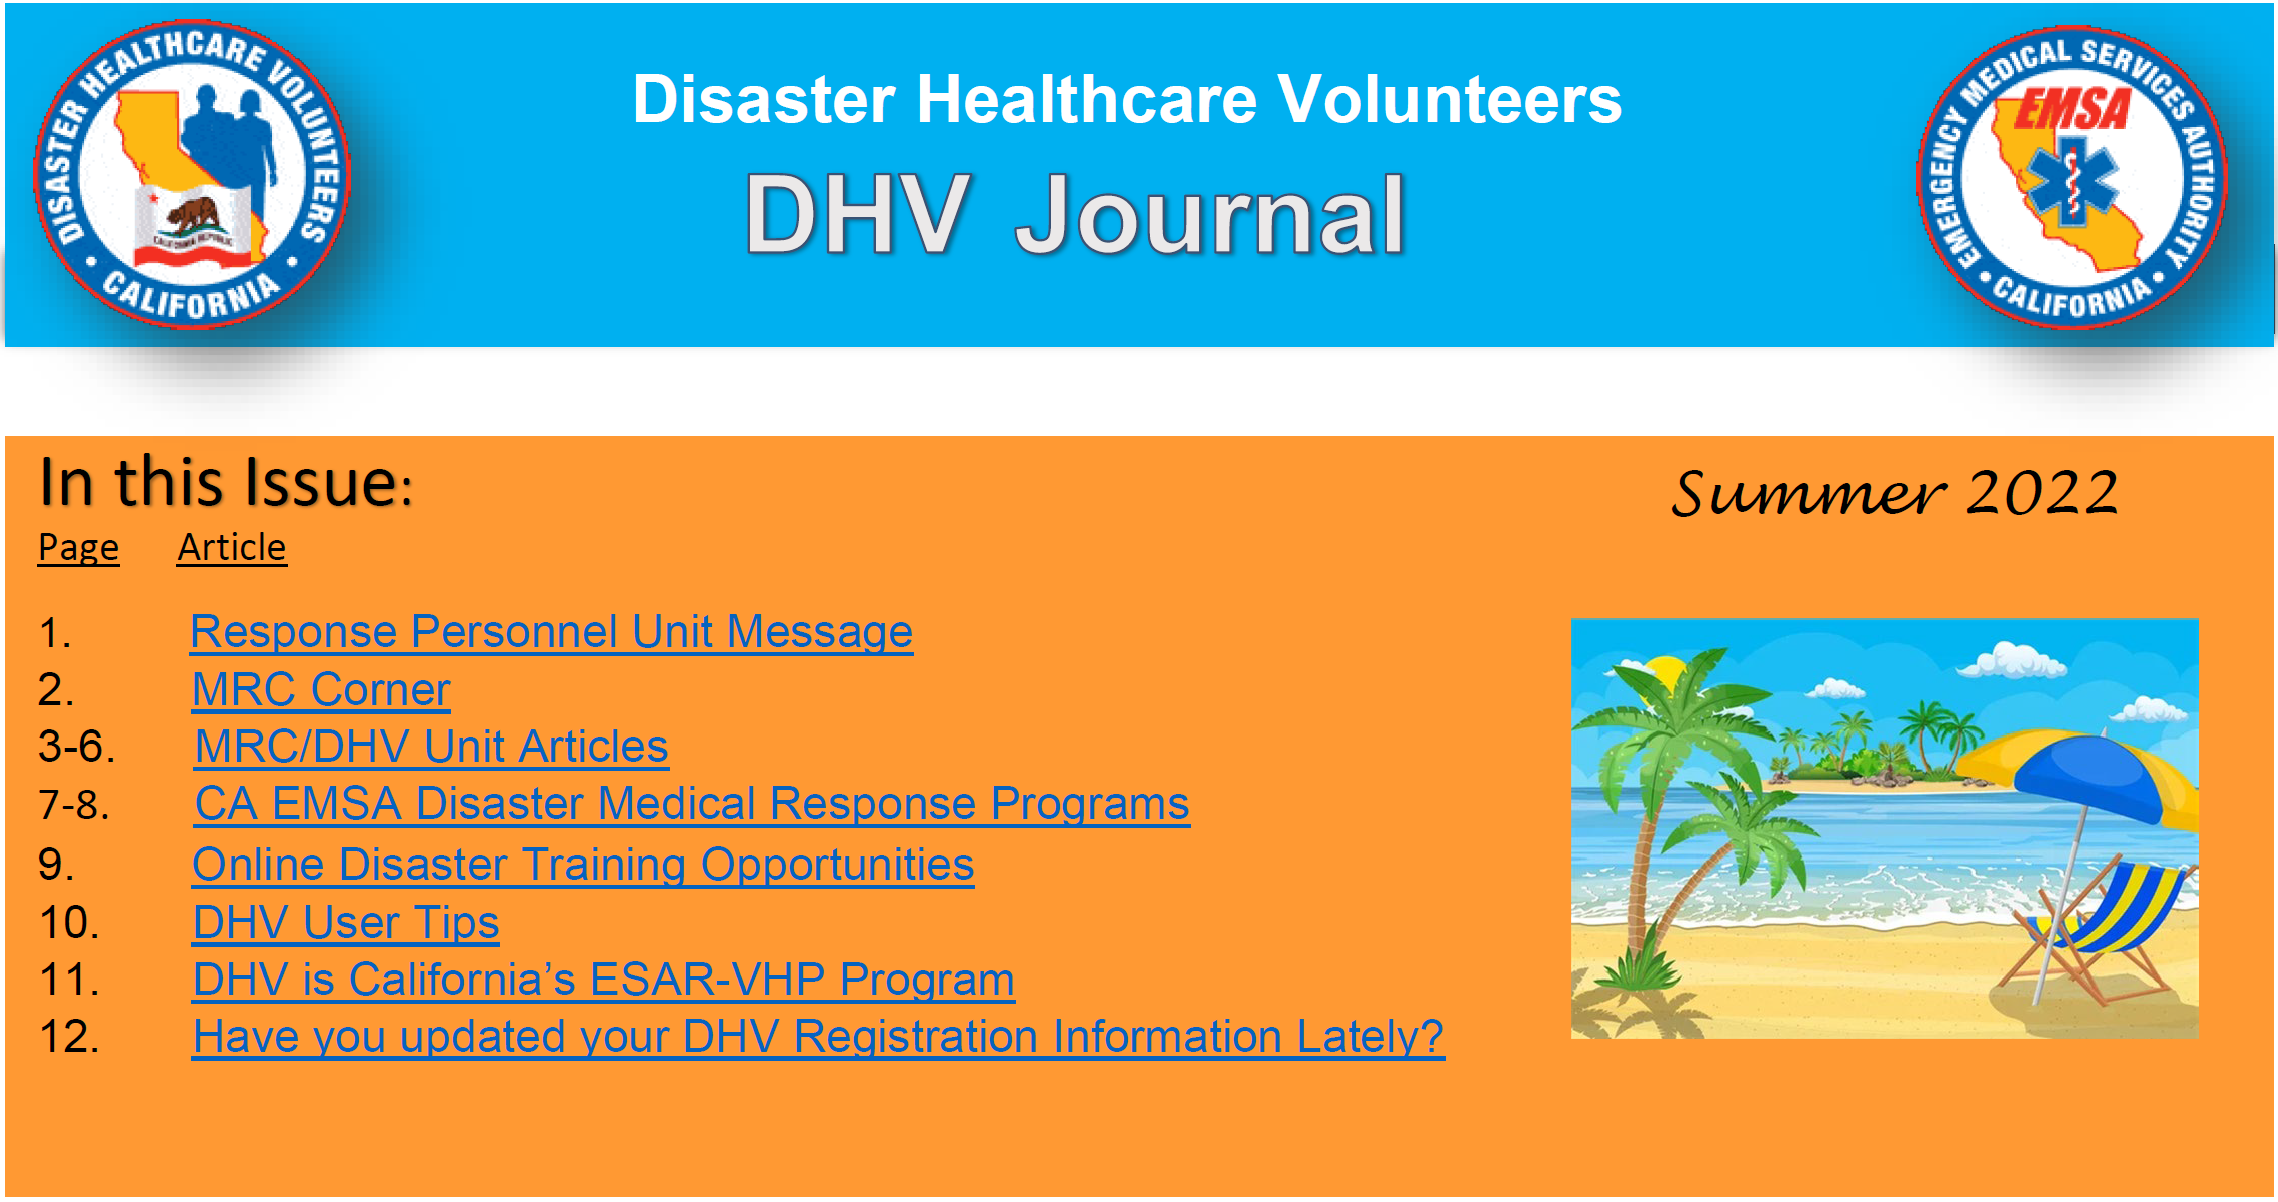 DHV Journal - Spring 2022 Front Page